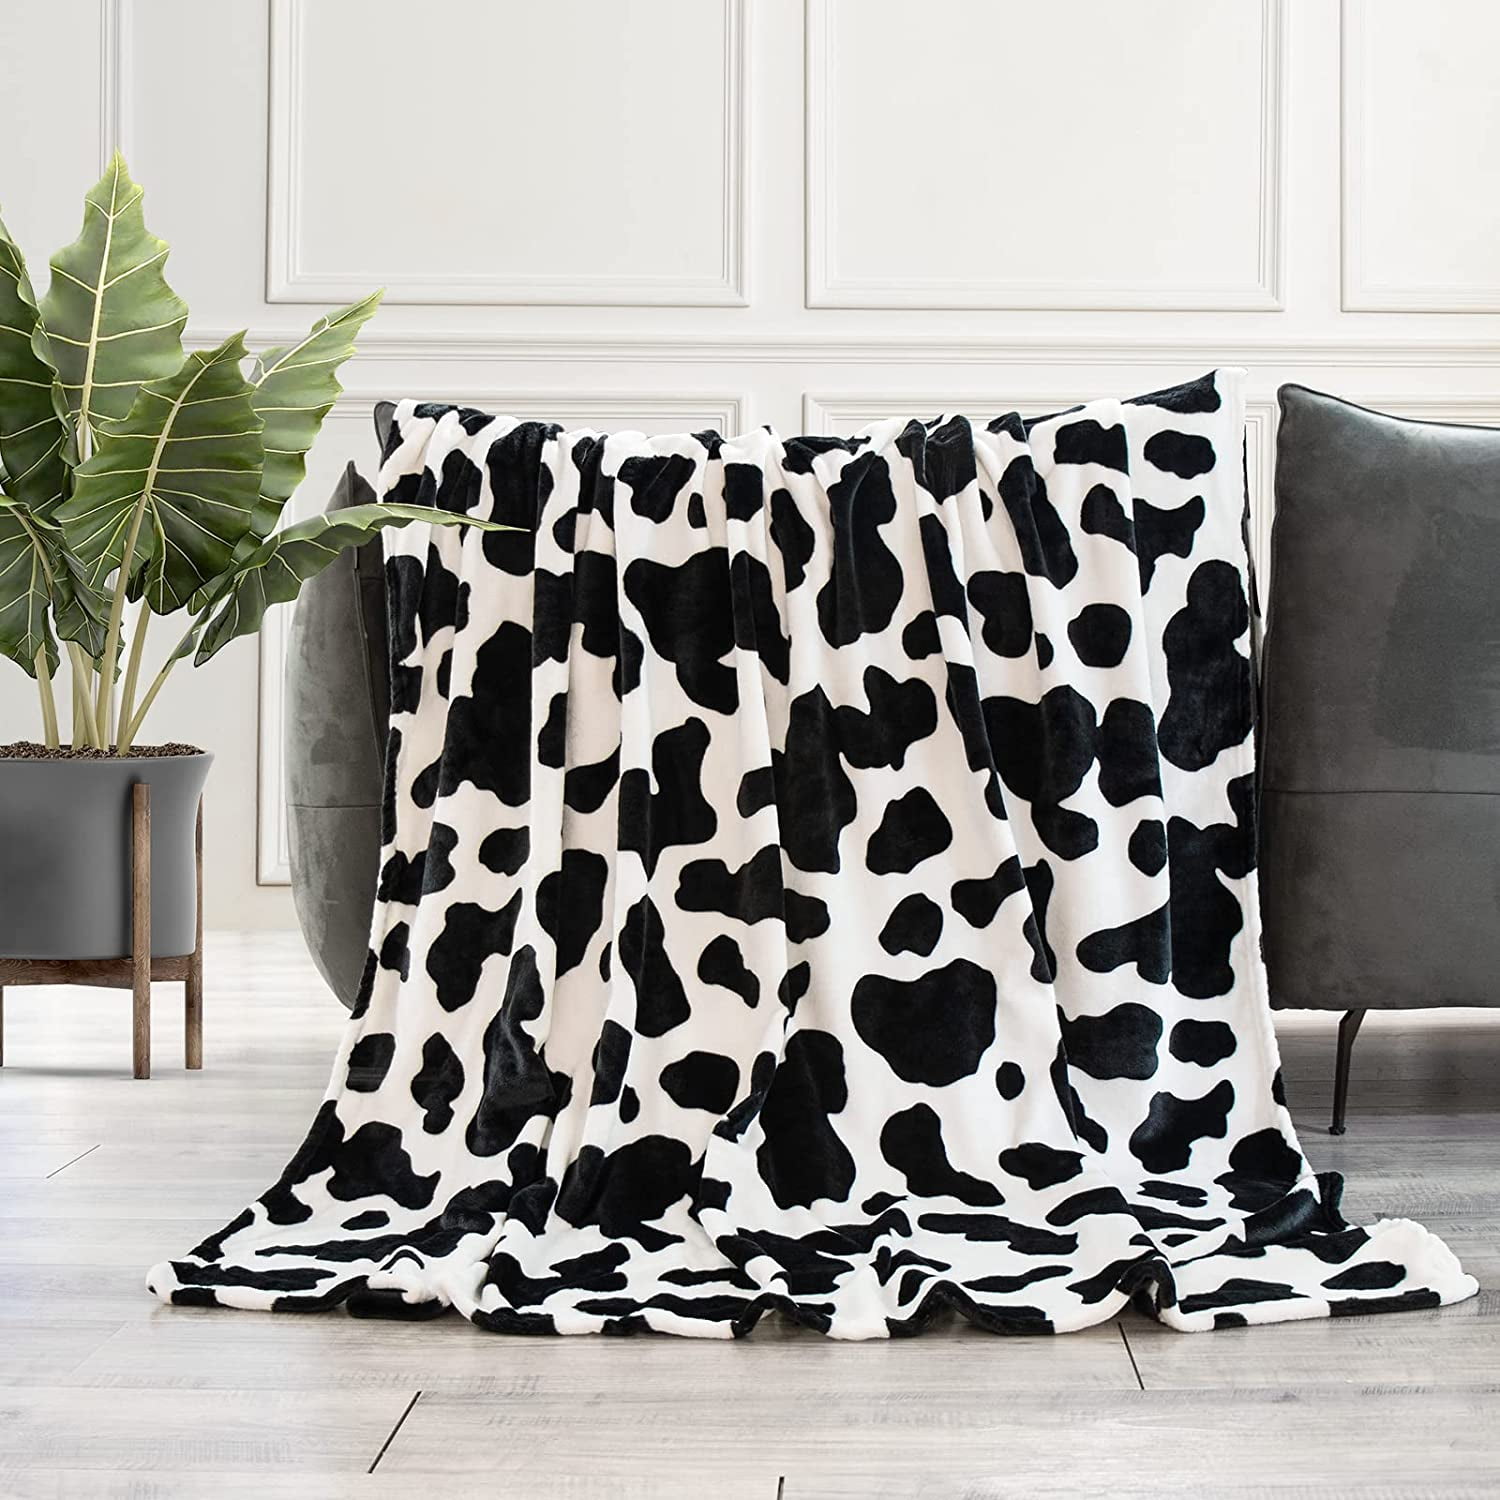 Bewolkt onaangenaam bedreiging Double Sided Cow Print Blanket Silky Soft Micro Fleece Cow Blanket Baby  Seat Couch Sofa Cow Print Blankets and Throws for Unisex Baby Boys Girls  Toddler Infant Newborn Cow Print 40x50 in -